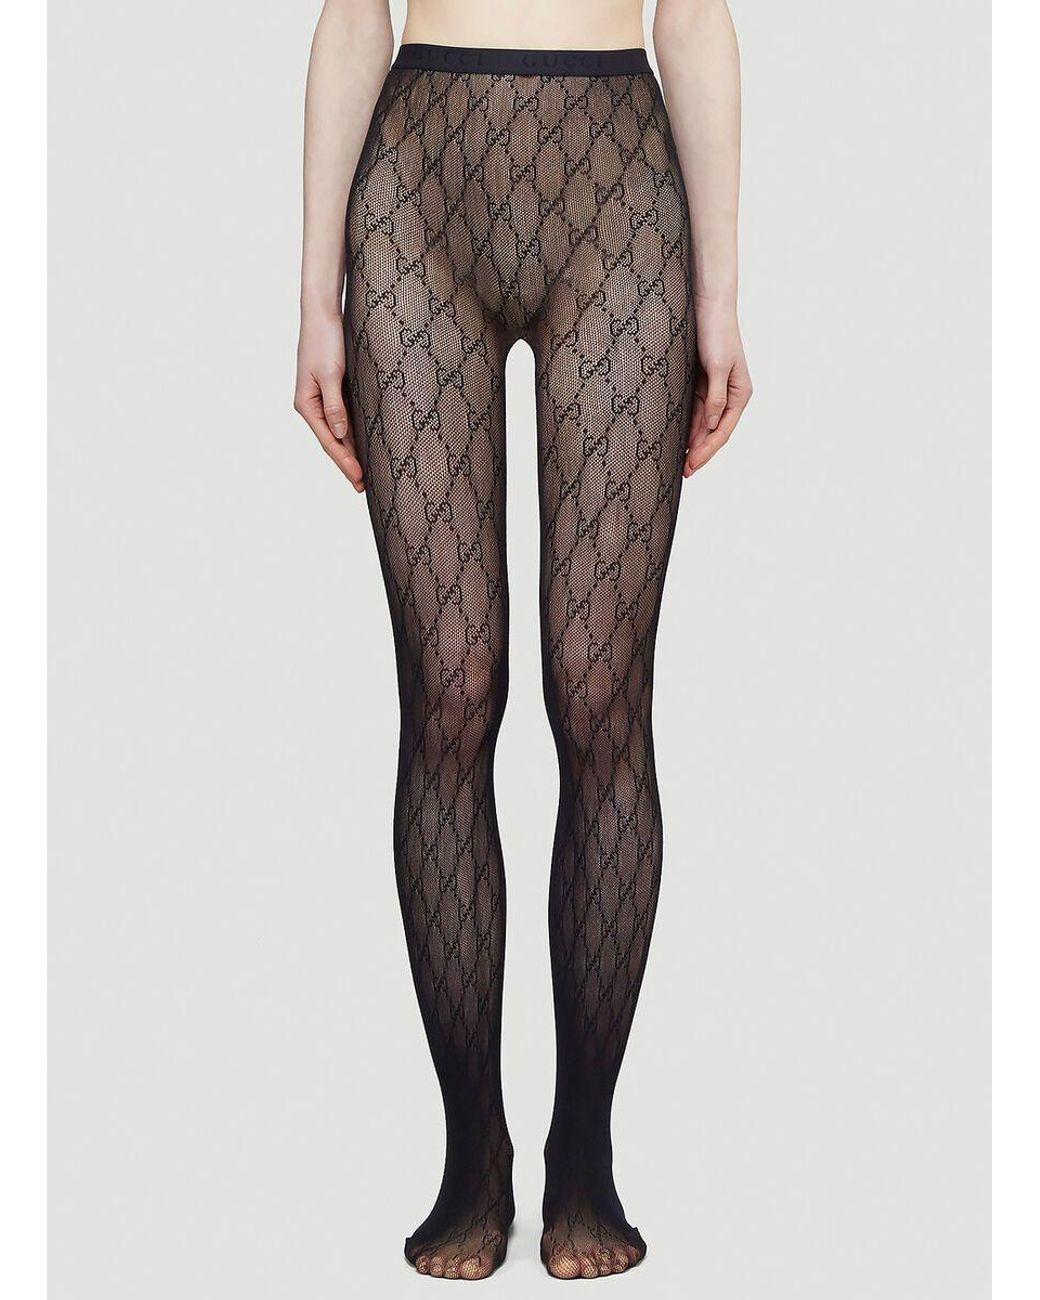 Gucci GG Patterned Sheer Tights - ShopStyle Hosiery